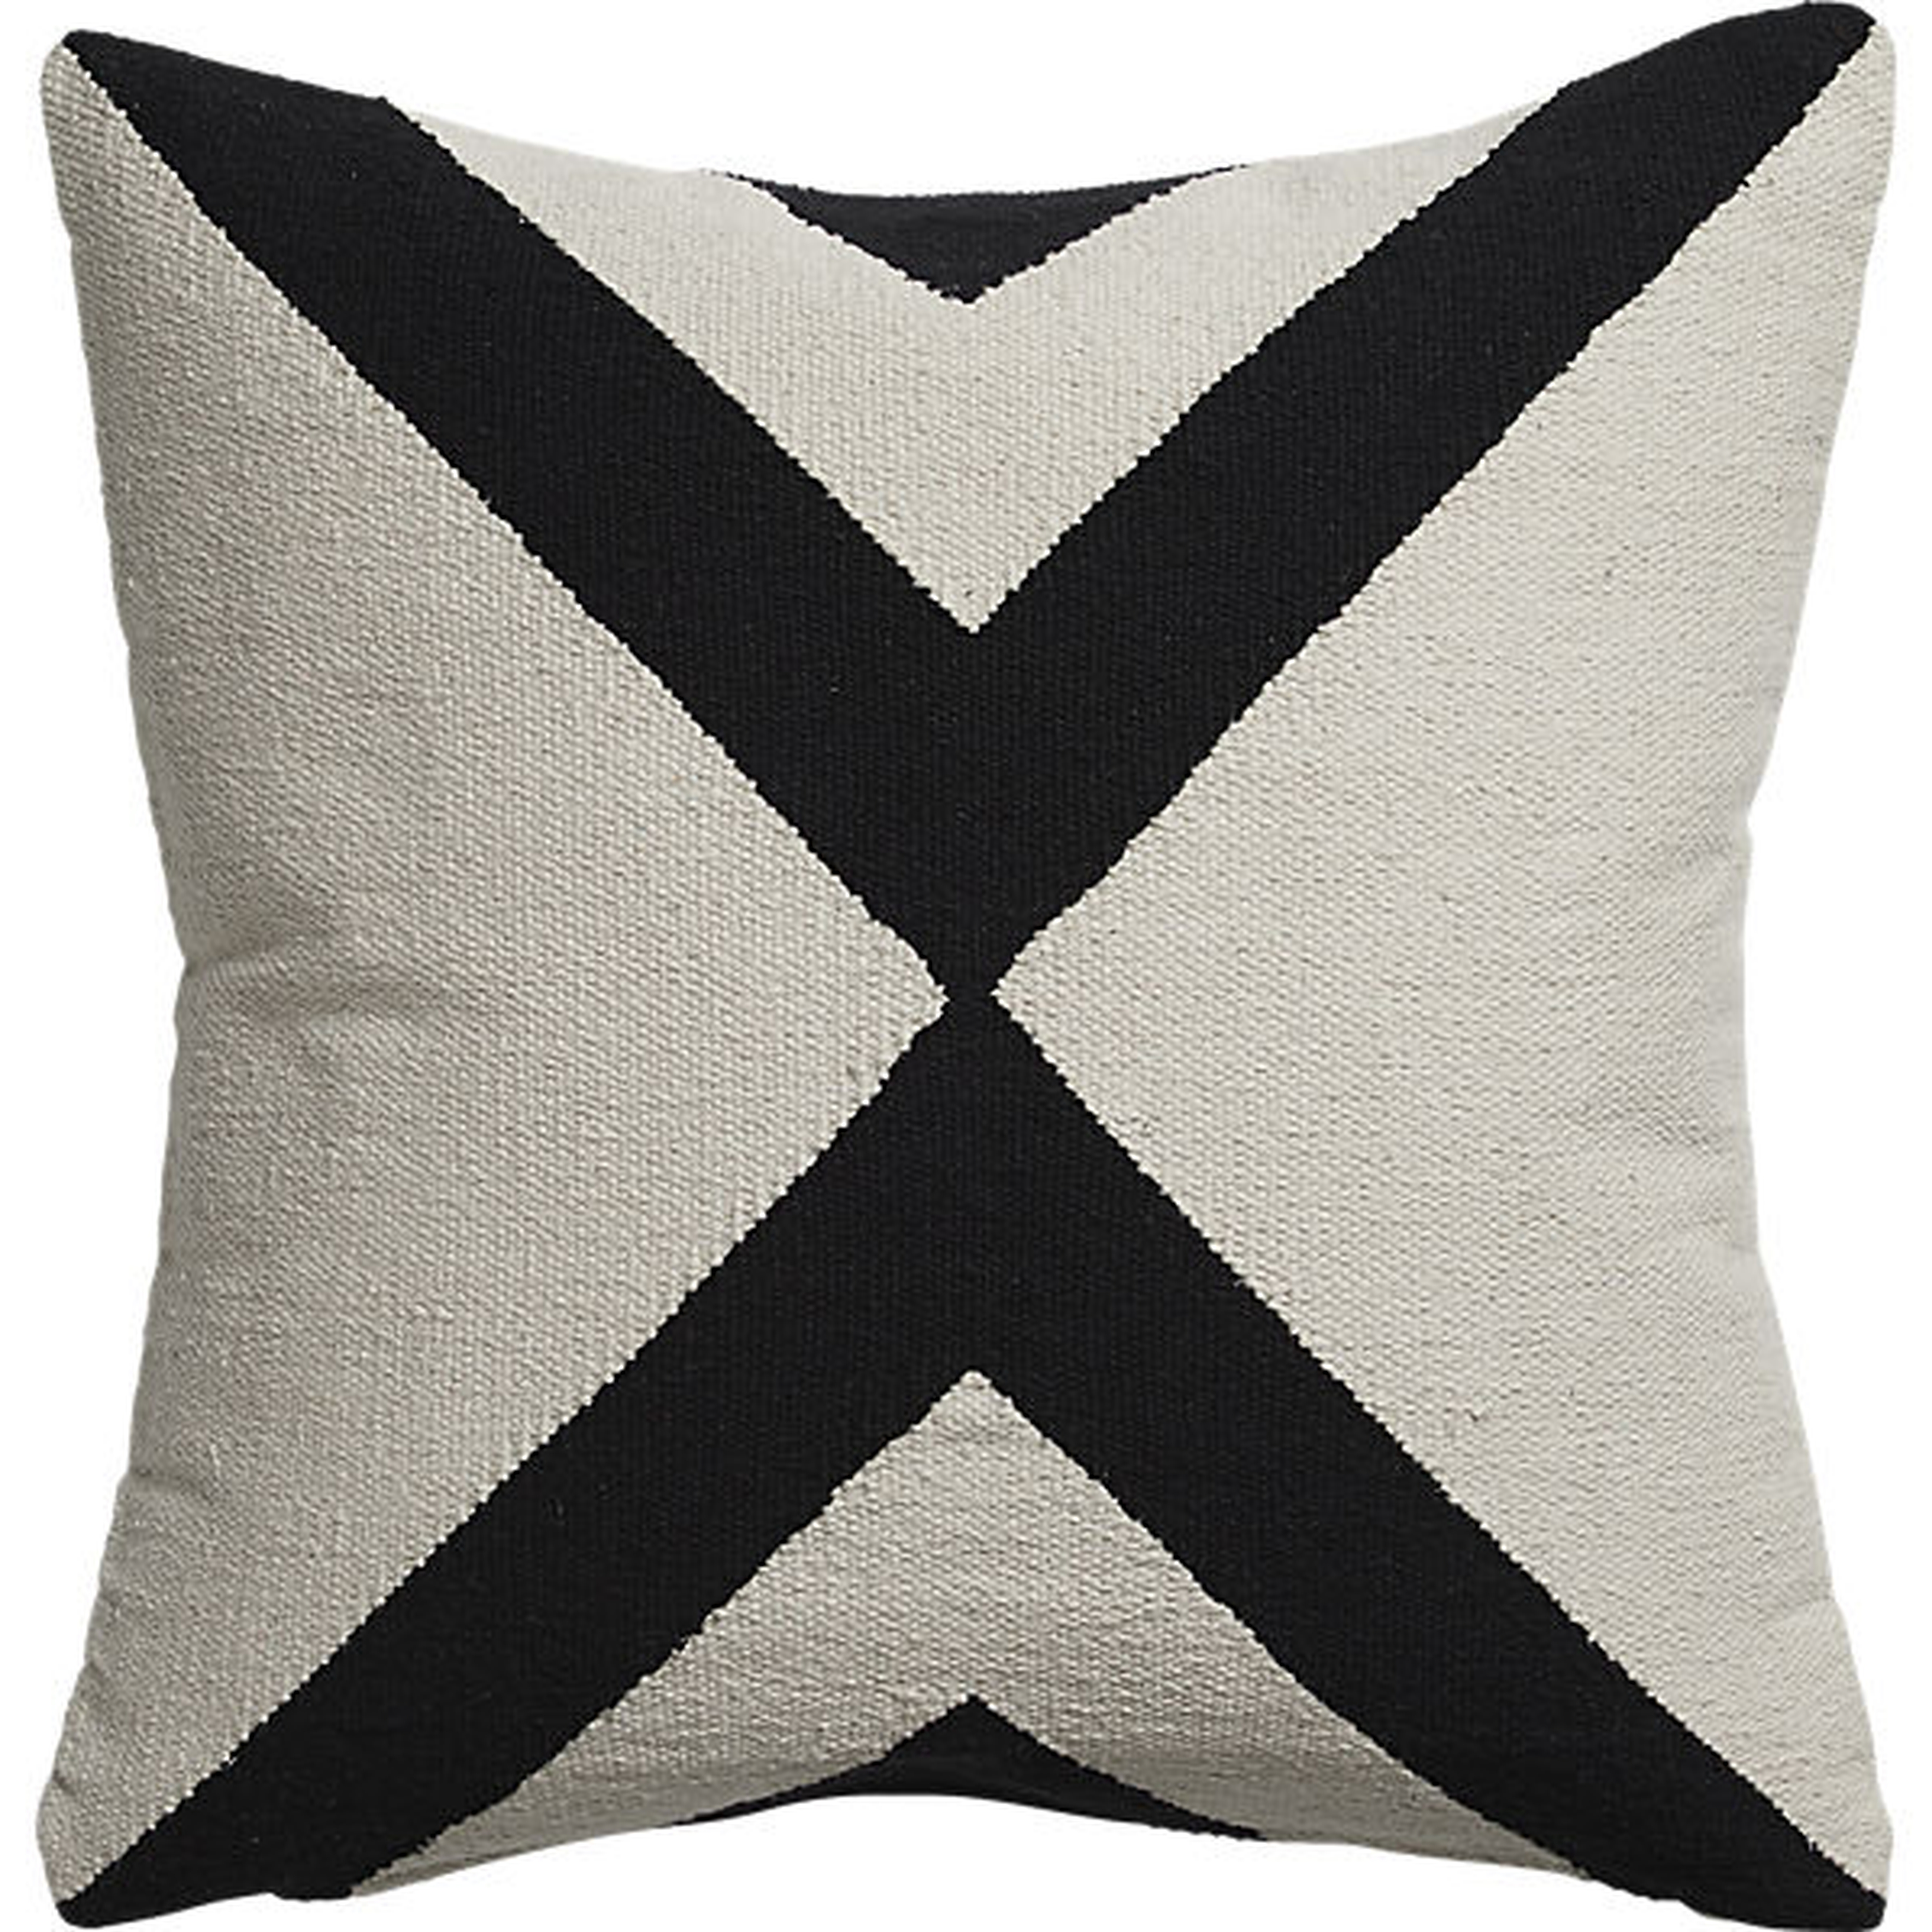 Xbase pillow - Ivory/Black - 23x23 - With Insert - CB2